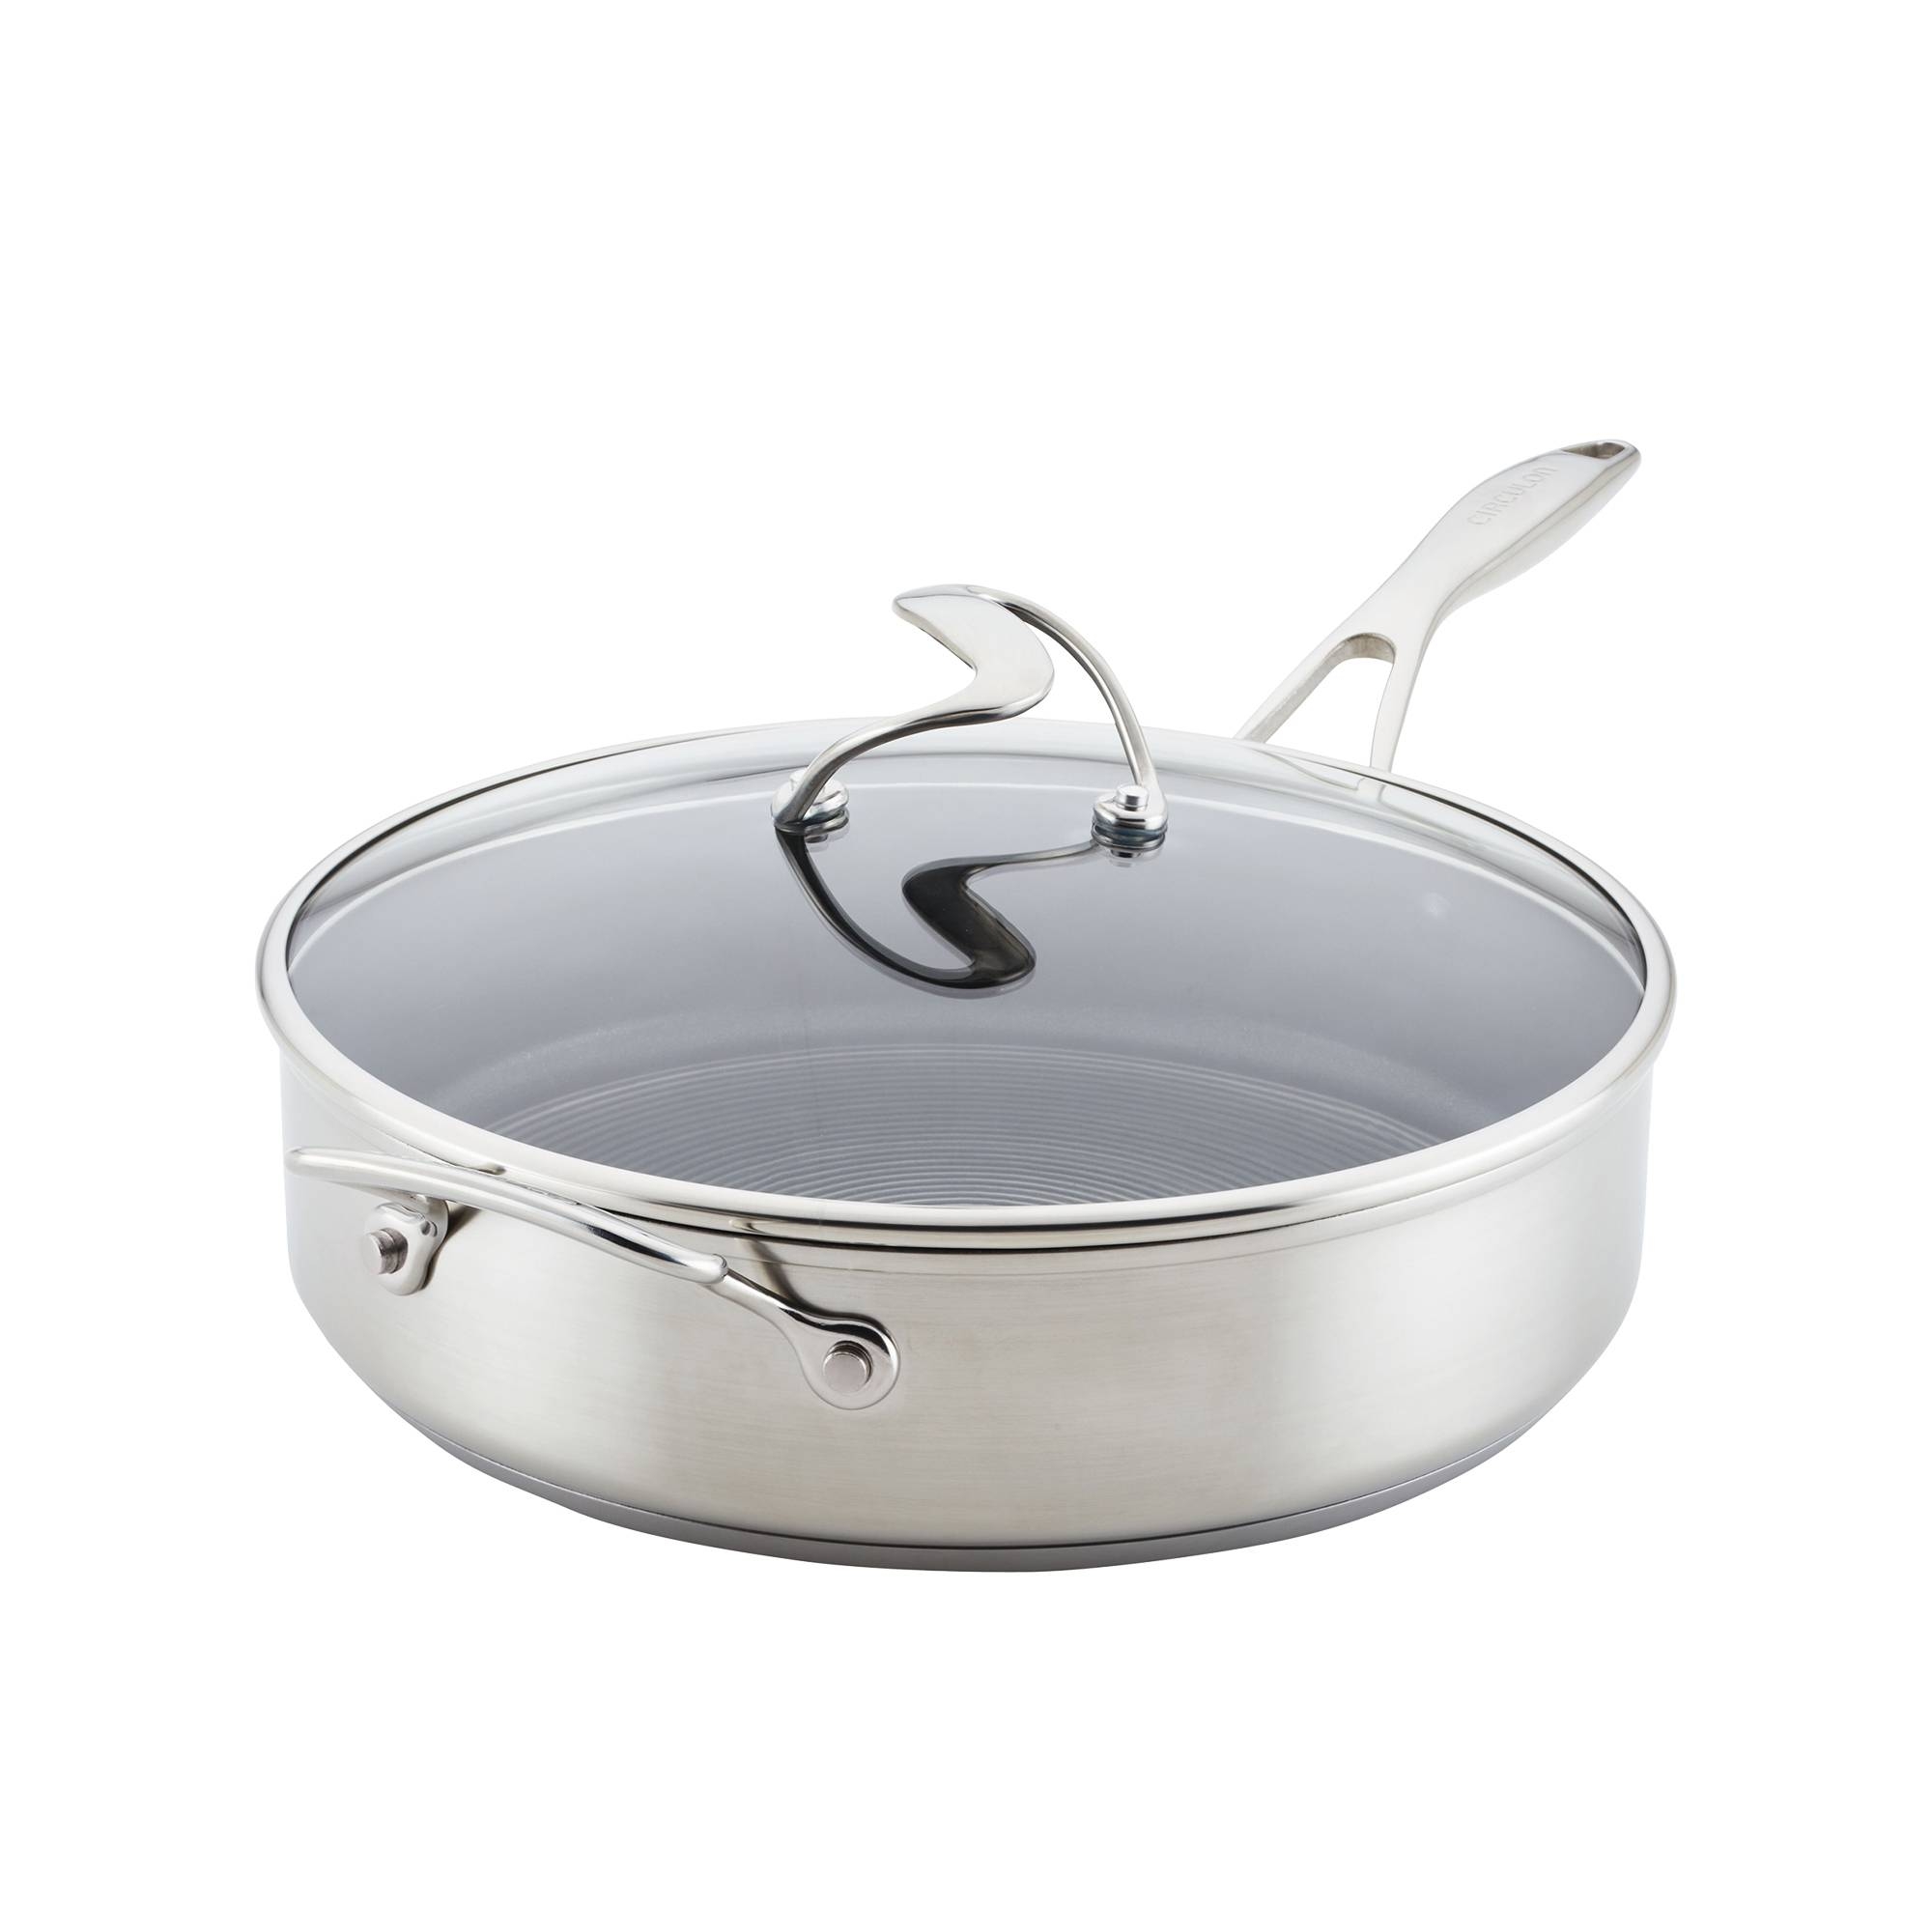 Circulon Steelshield S Series Covered Skillet with Helper Handle 30cm - 4.7L Image 1